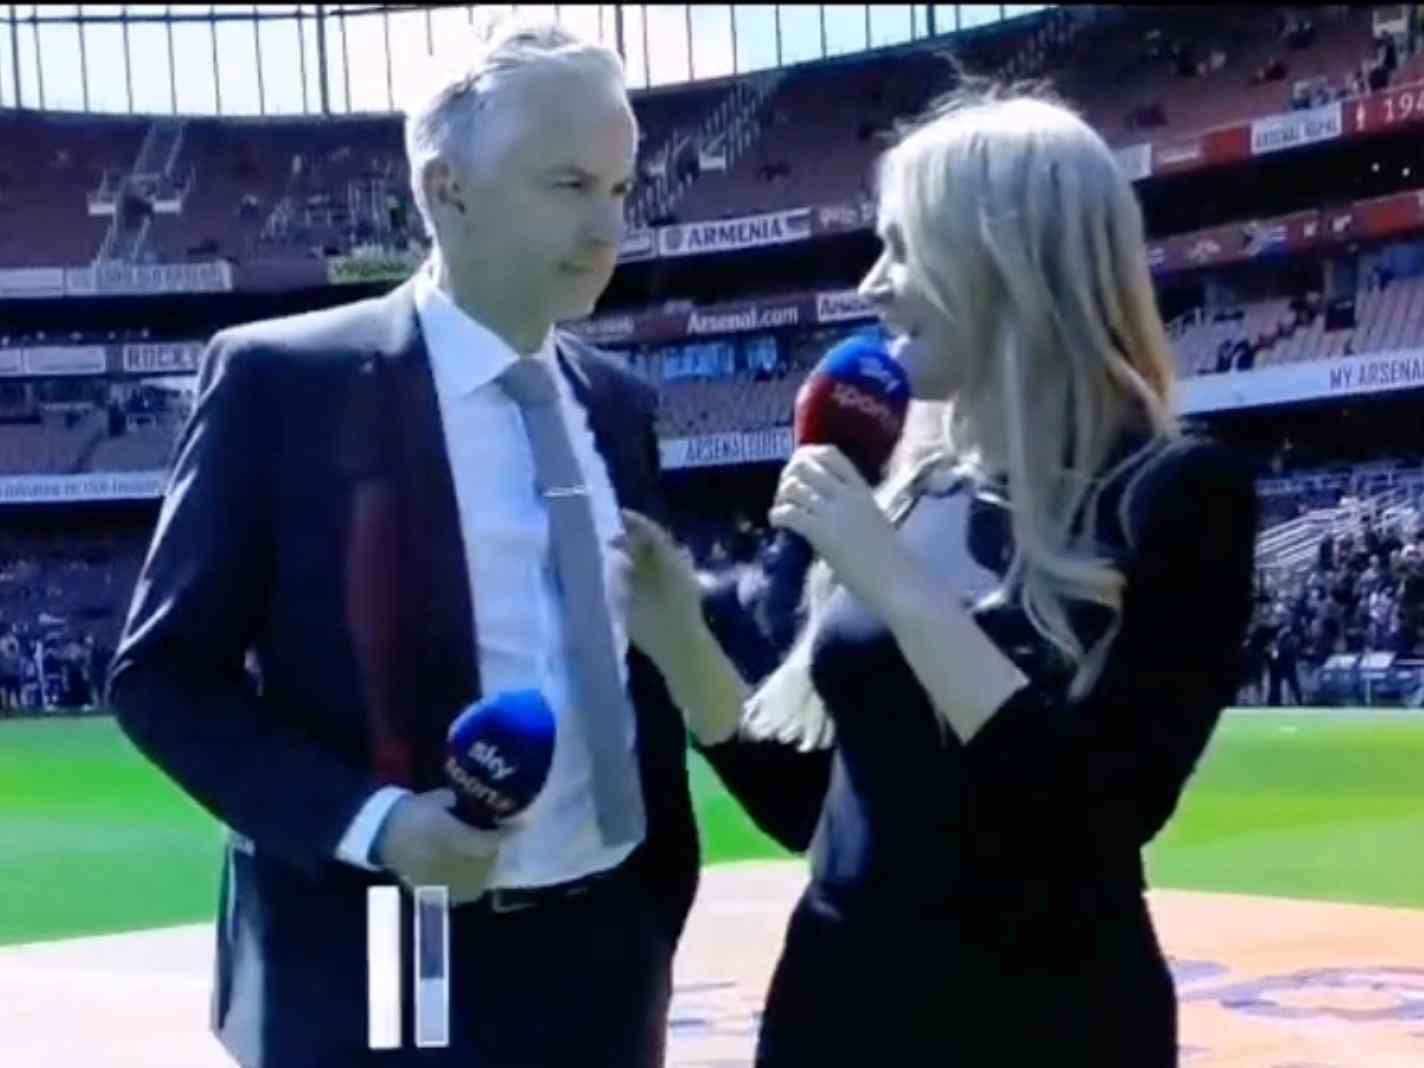 Sky Sports colleague Alan Smith avoids awkward moment with Laura Woods live on air